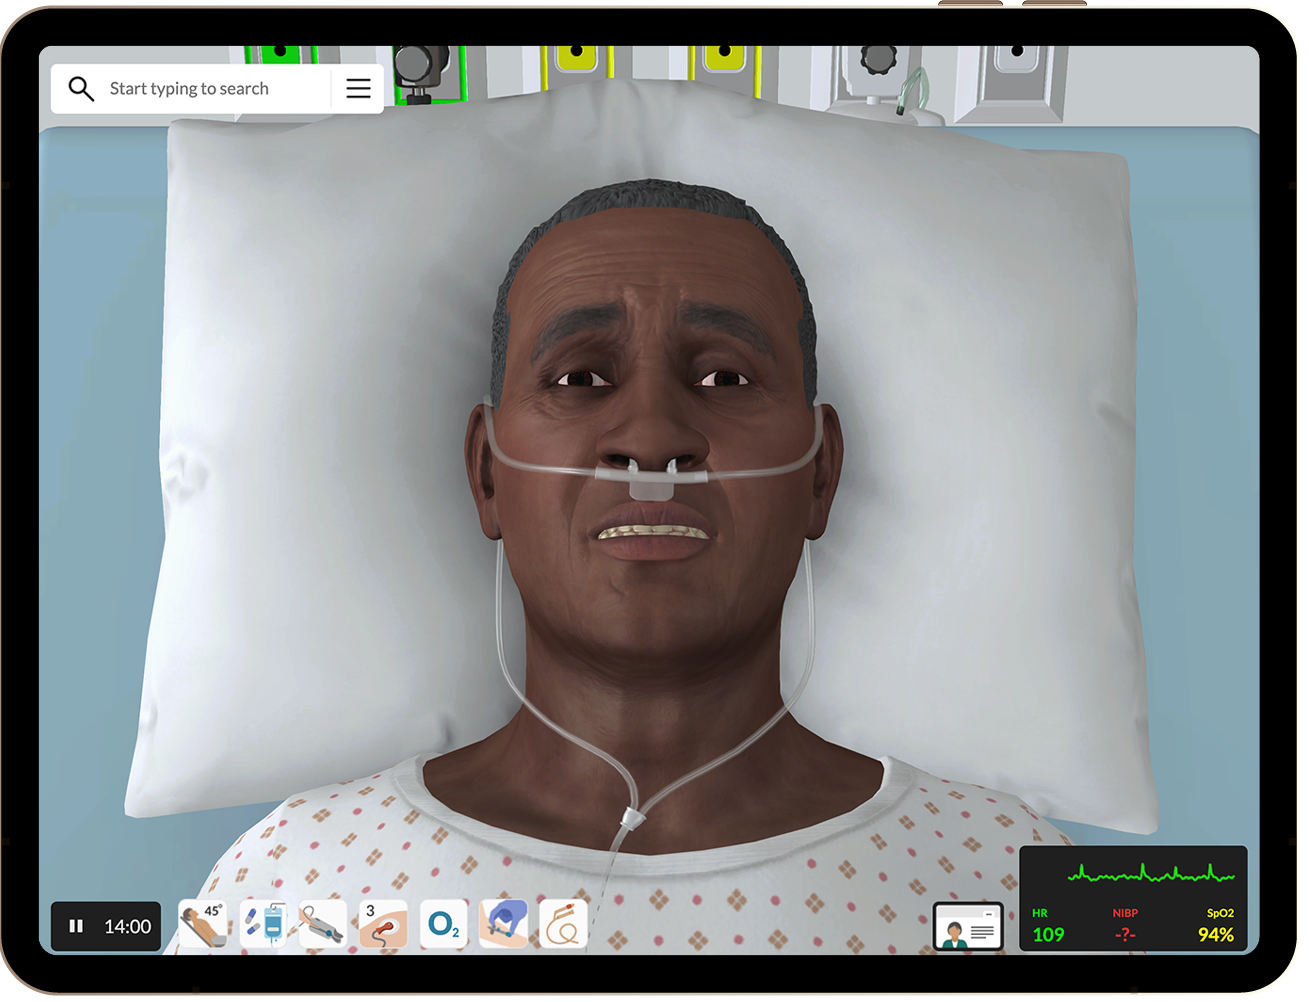 vSim product image with patient simulation